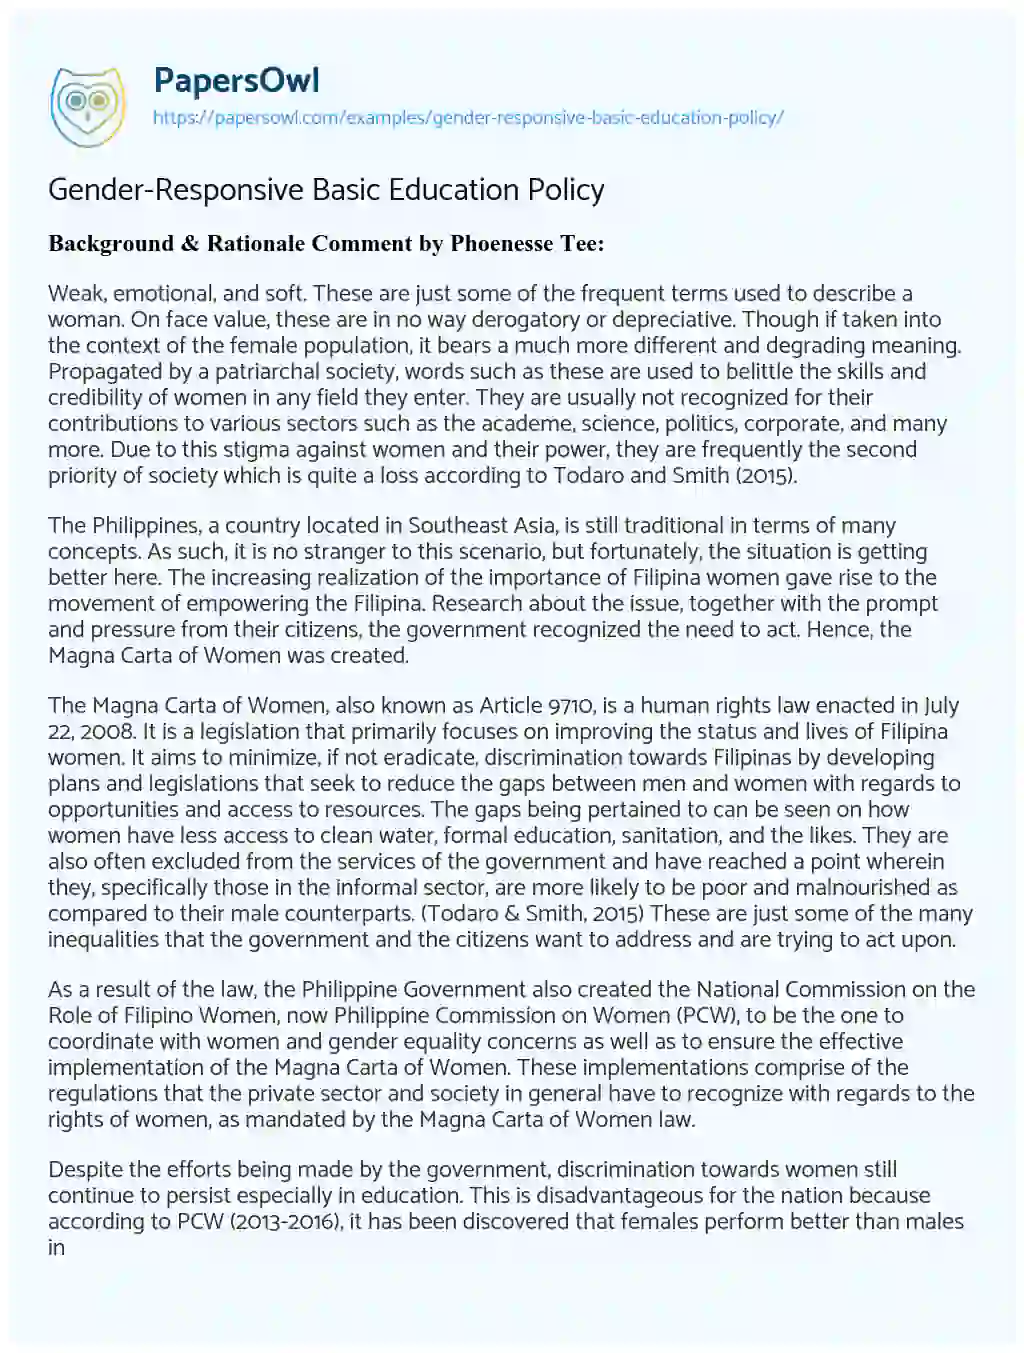 Gender-Responsive Basic Education Policy essay